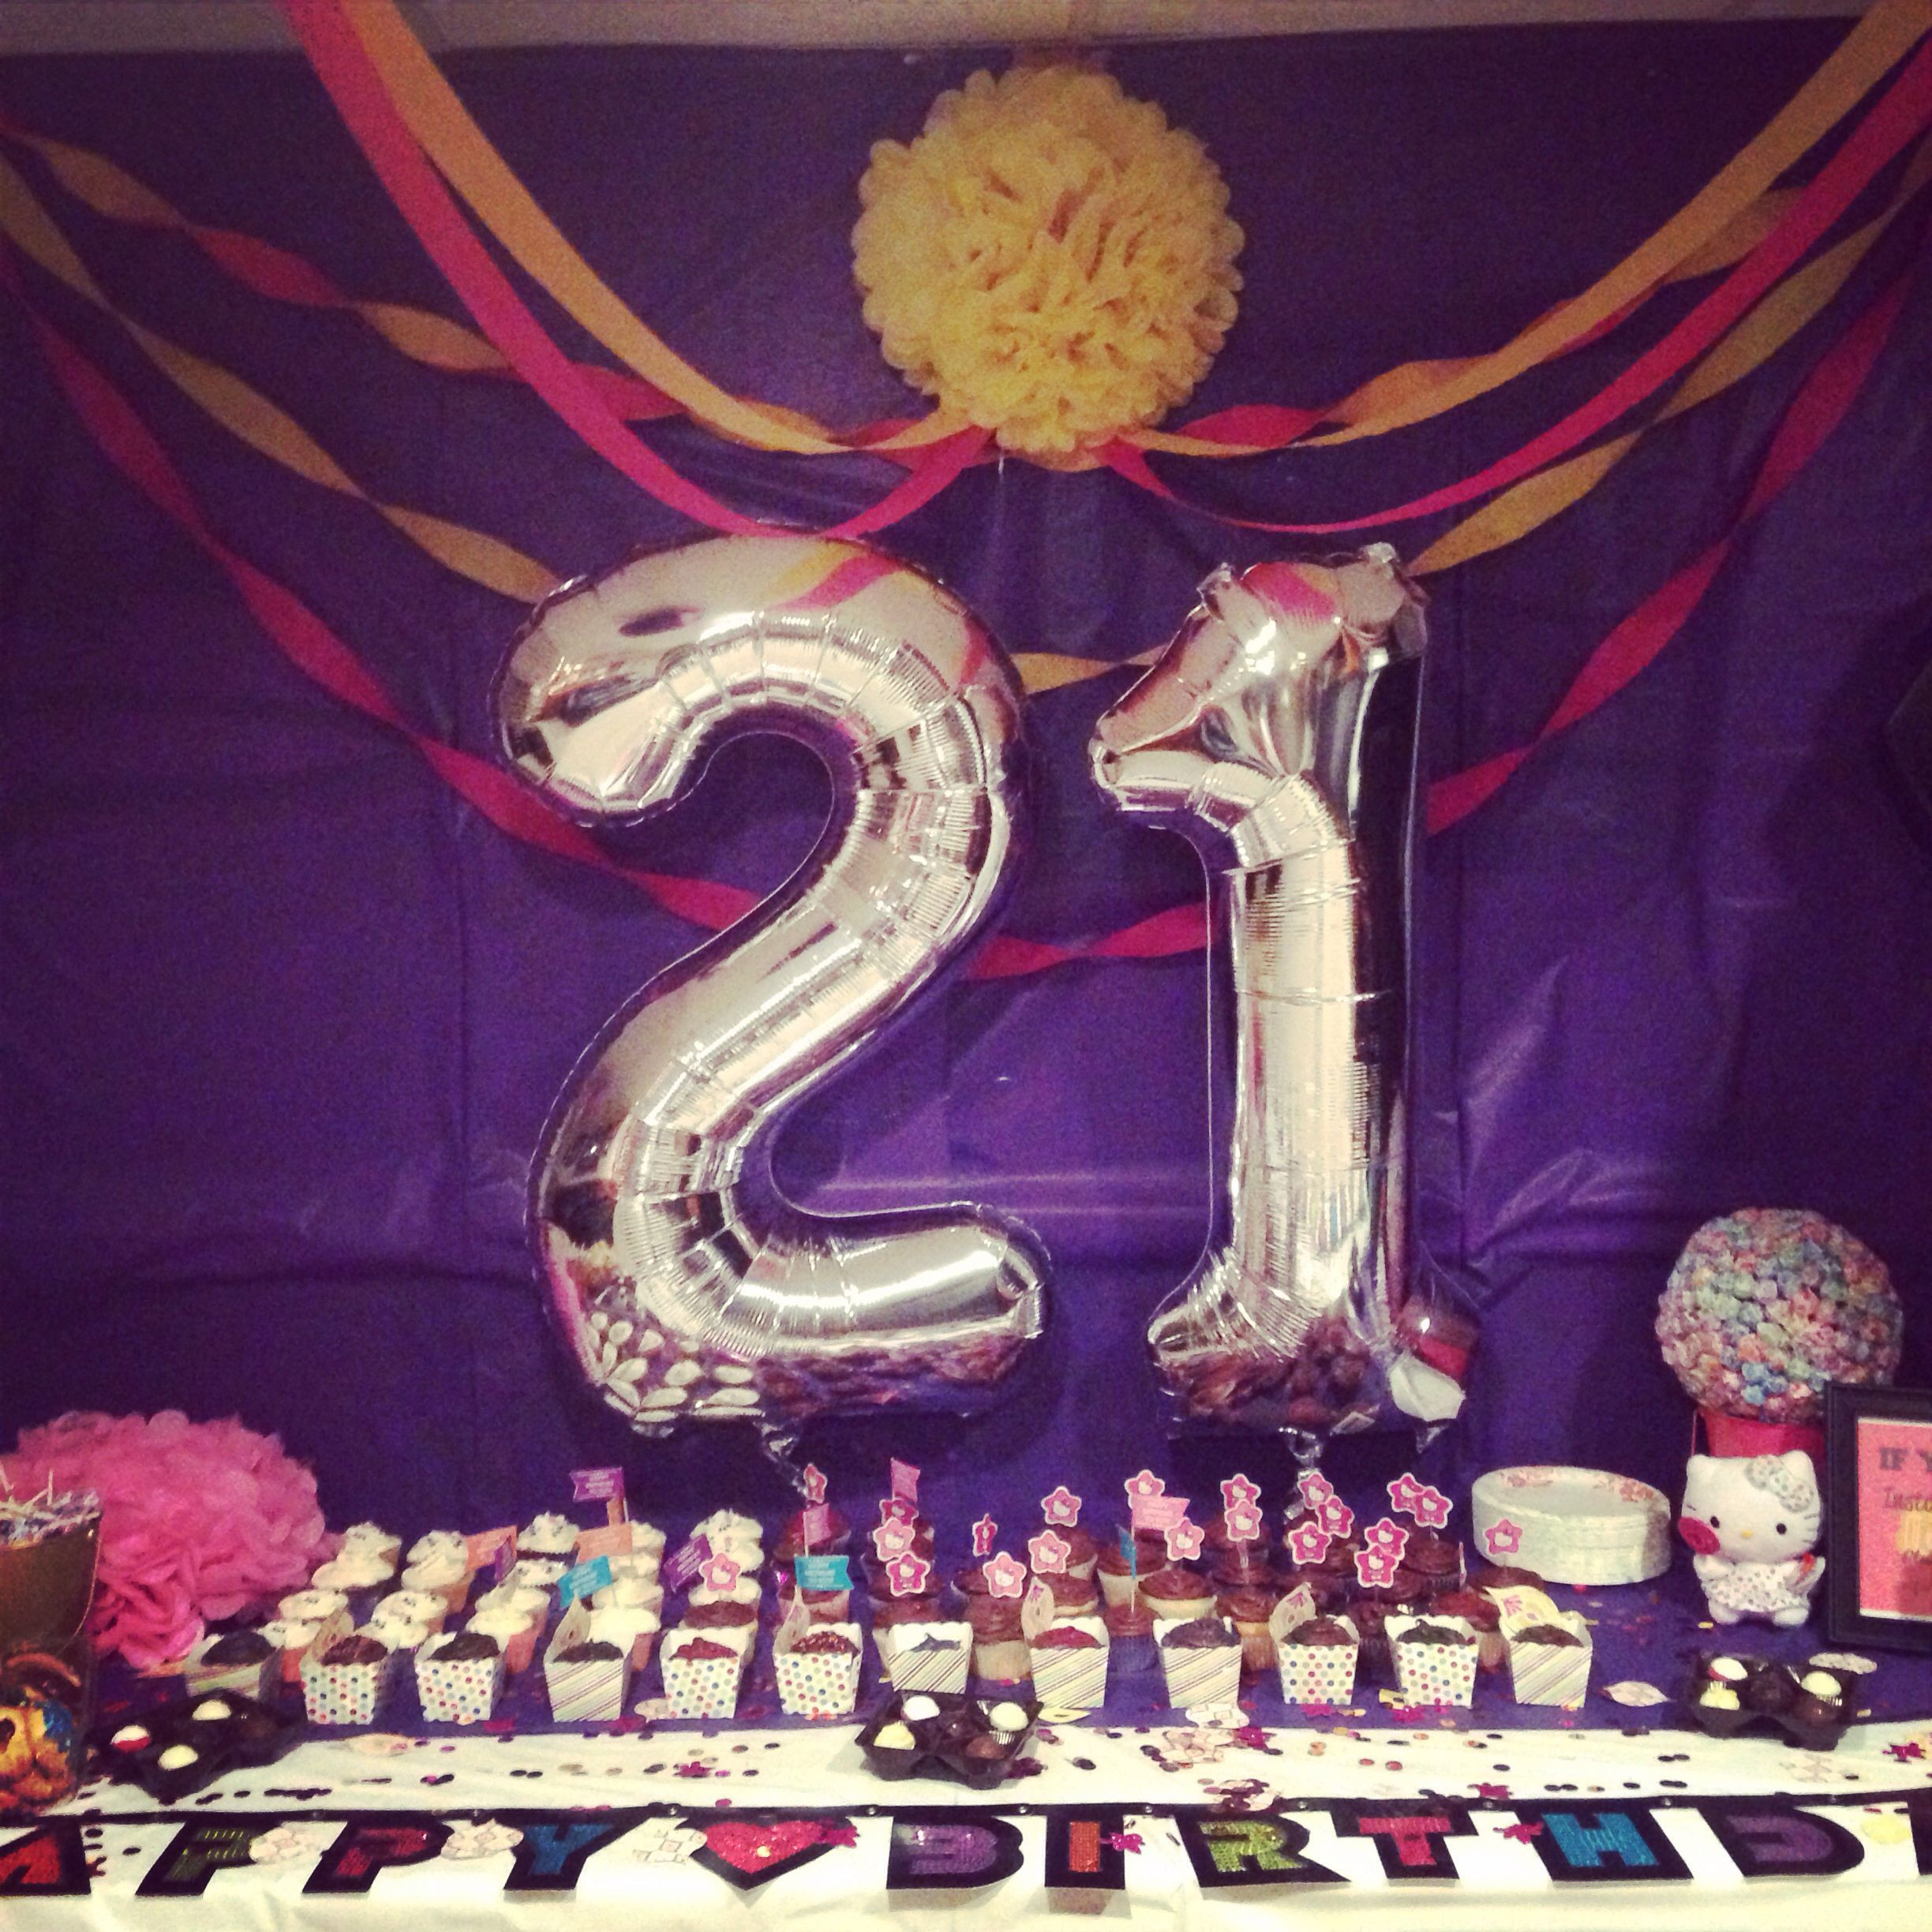 21st Birthday Party Decorations
 The 25 best 21st birthday decorations ideas on Pinterest